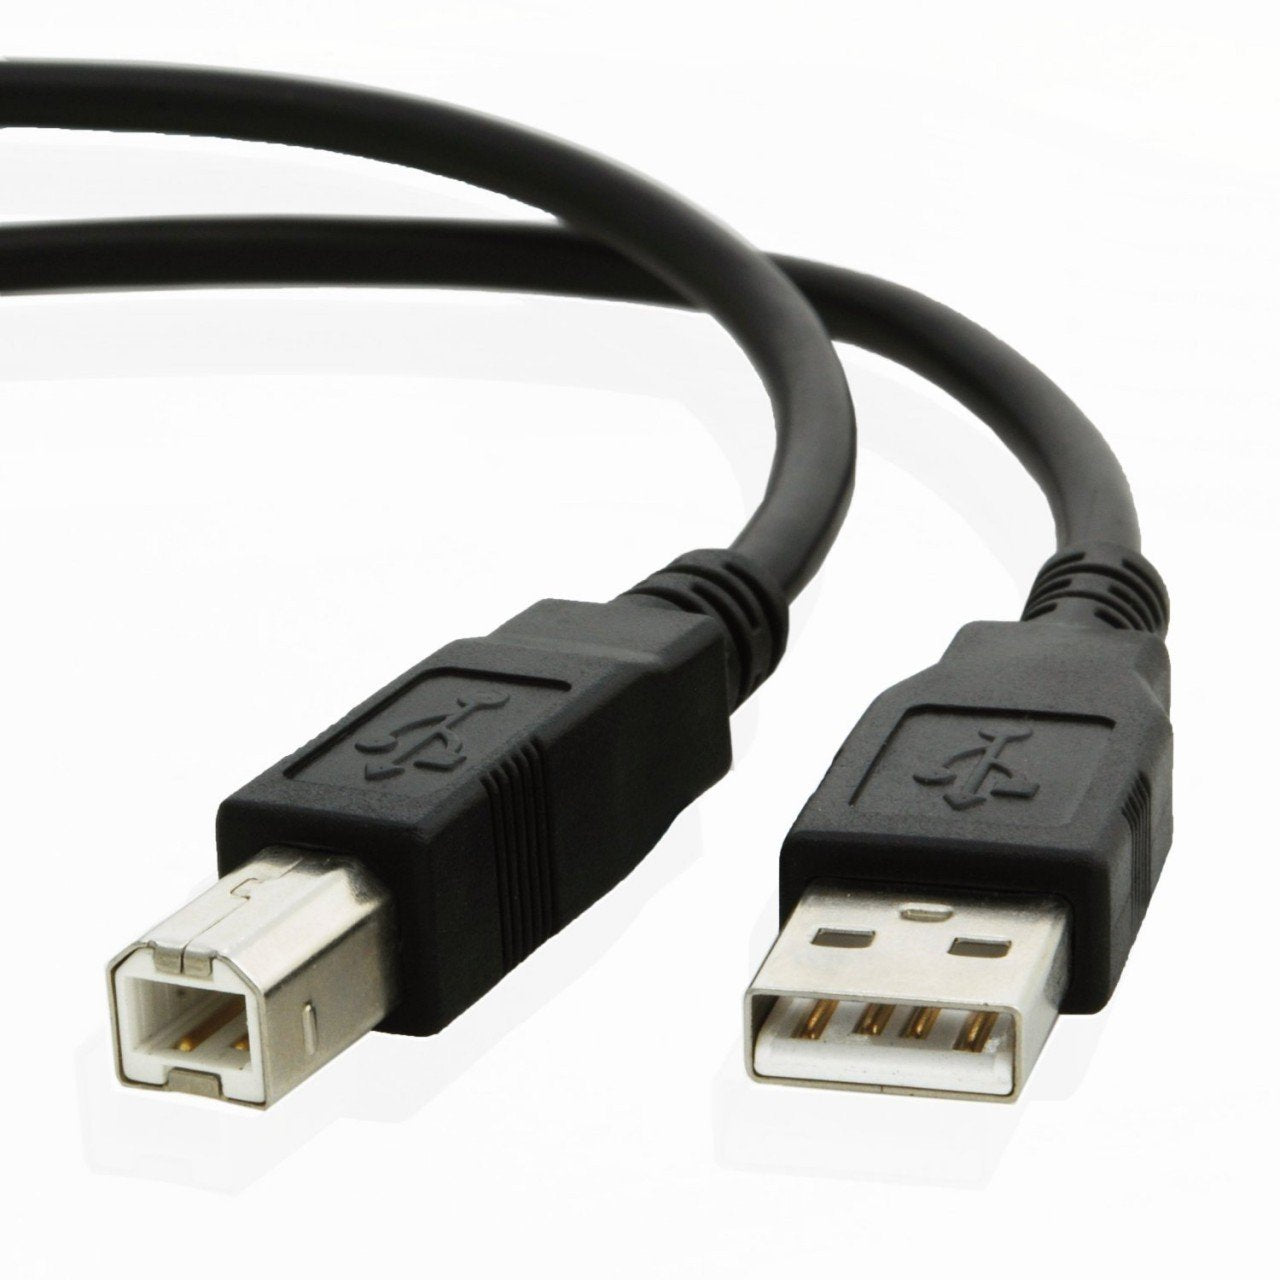 USB cable for Epson MOBILINK P60II